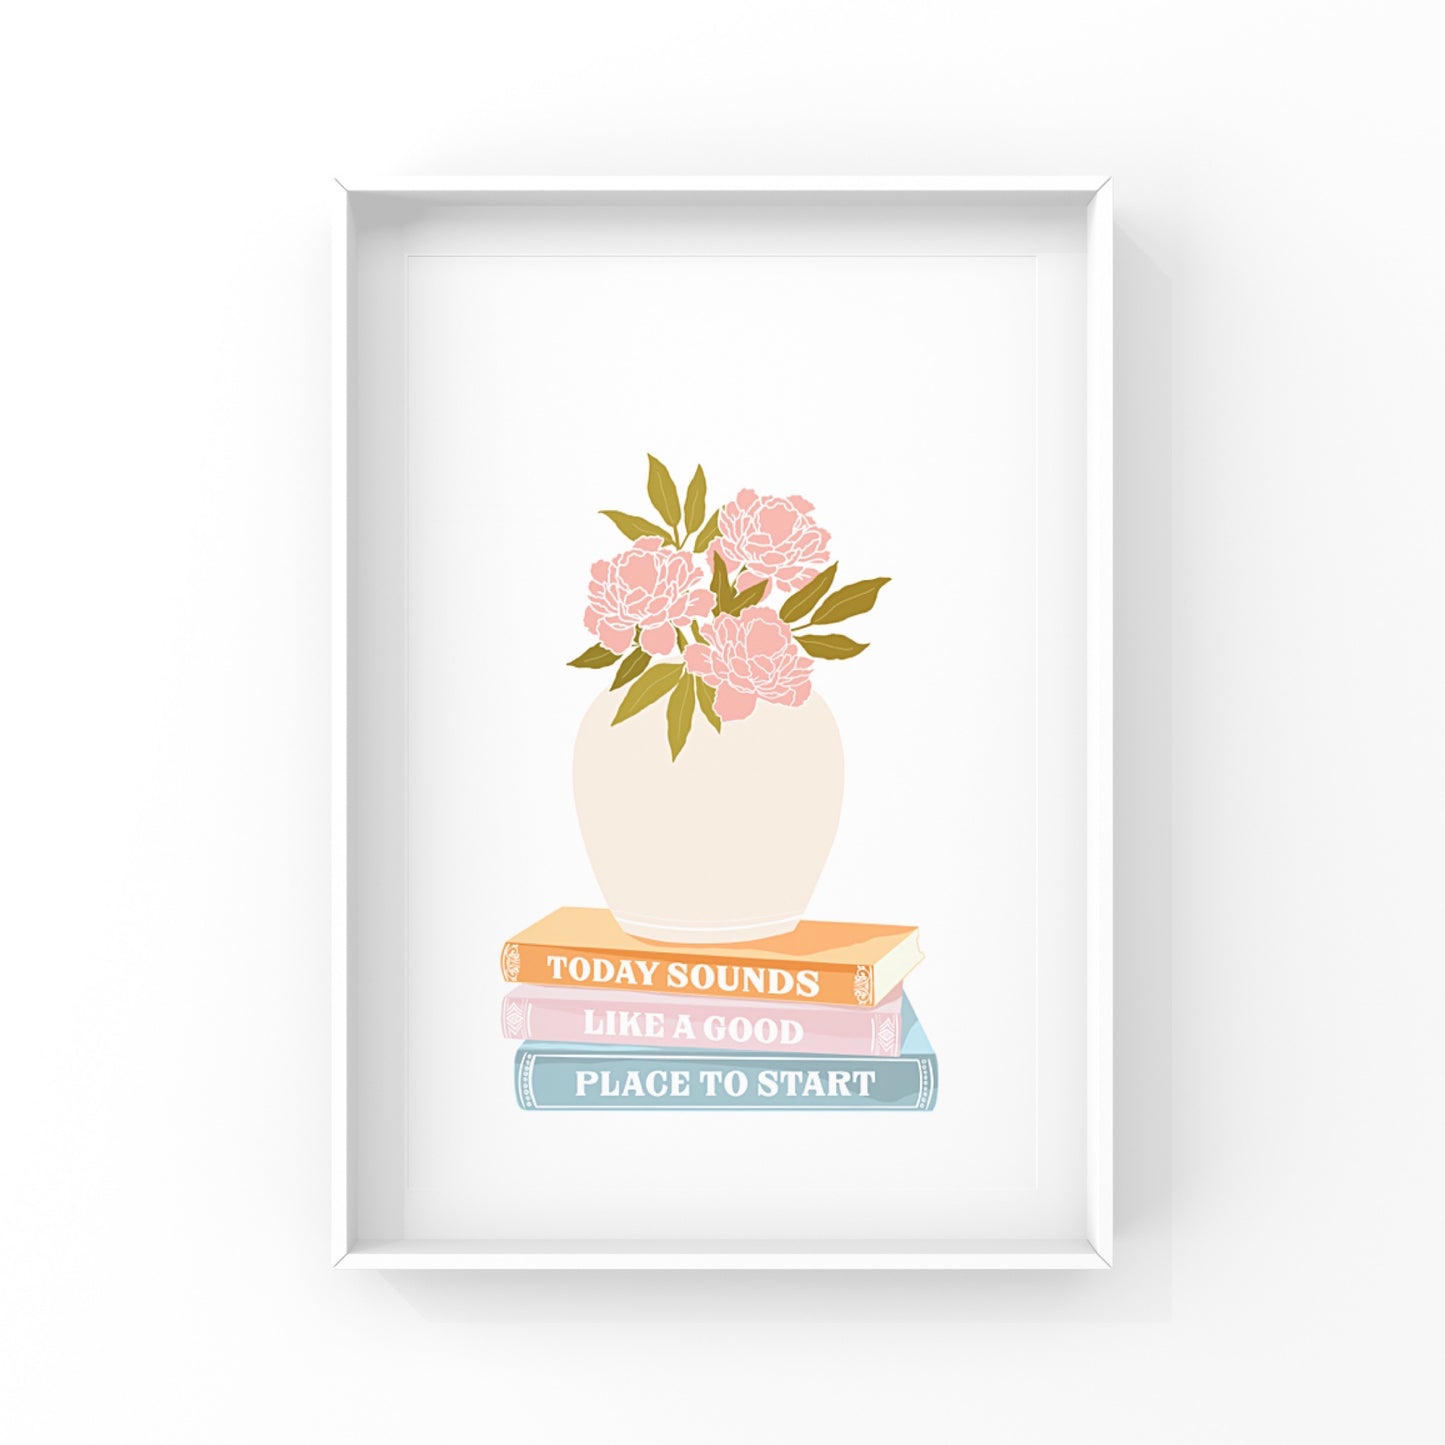 This print says: Today sounds like a good place to start. I hope it inspires and motivates you to wake up each day and make the most of it. There may be no perfect time to start anything, so why not make it today?